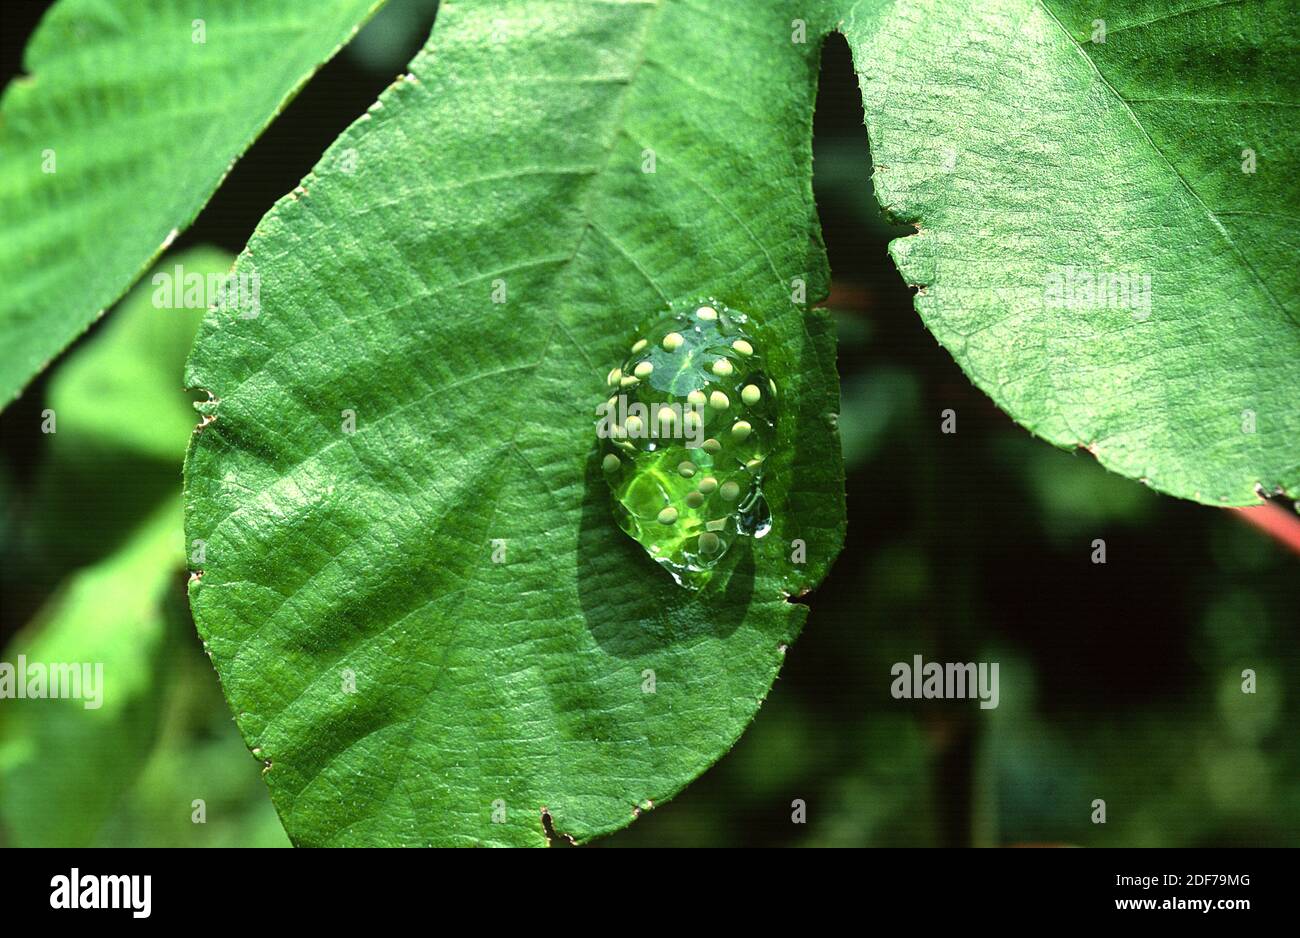 Glass frog (Hyalinobatrachium colymbiphyllum); eggs on a leaf. This photo was taken in Costa Rica. Stock Photo